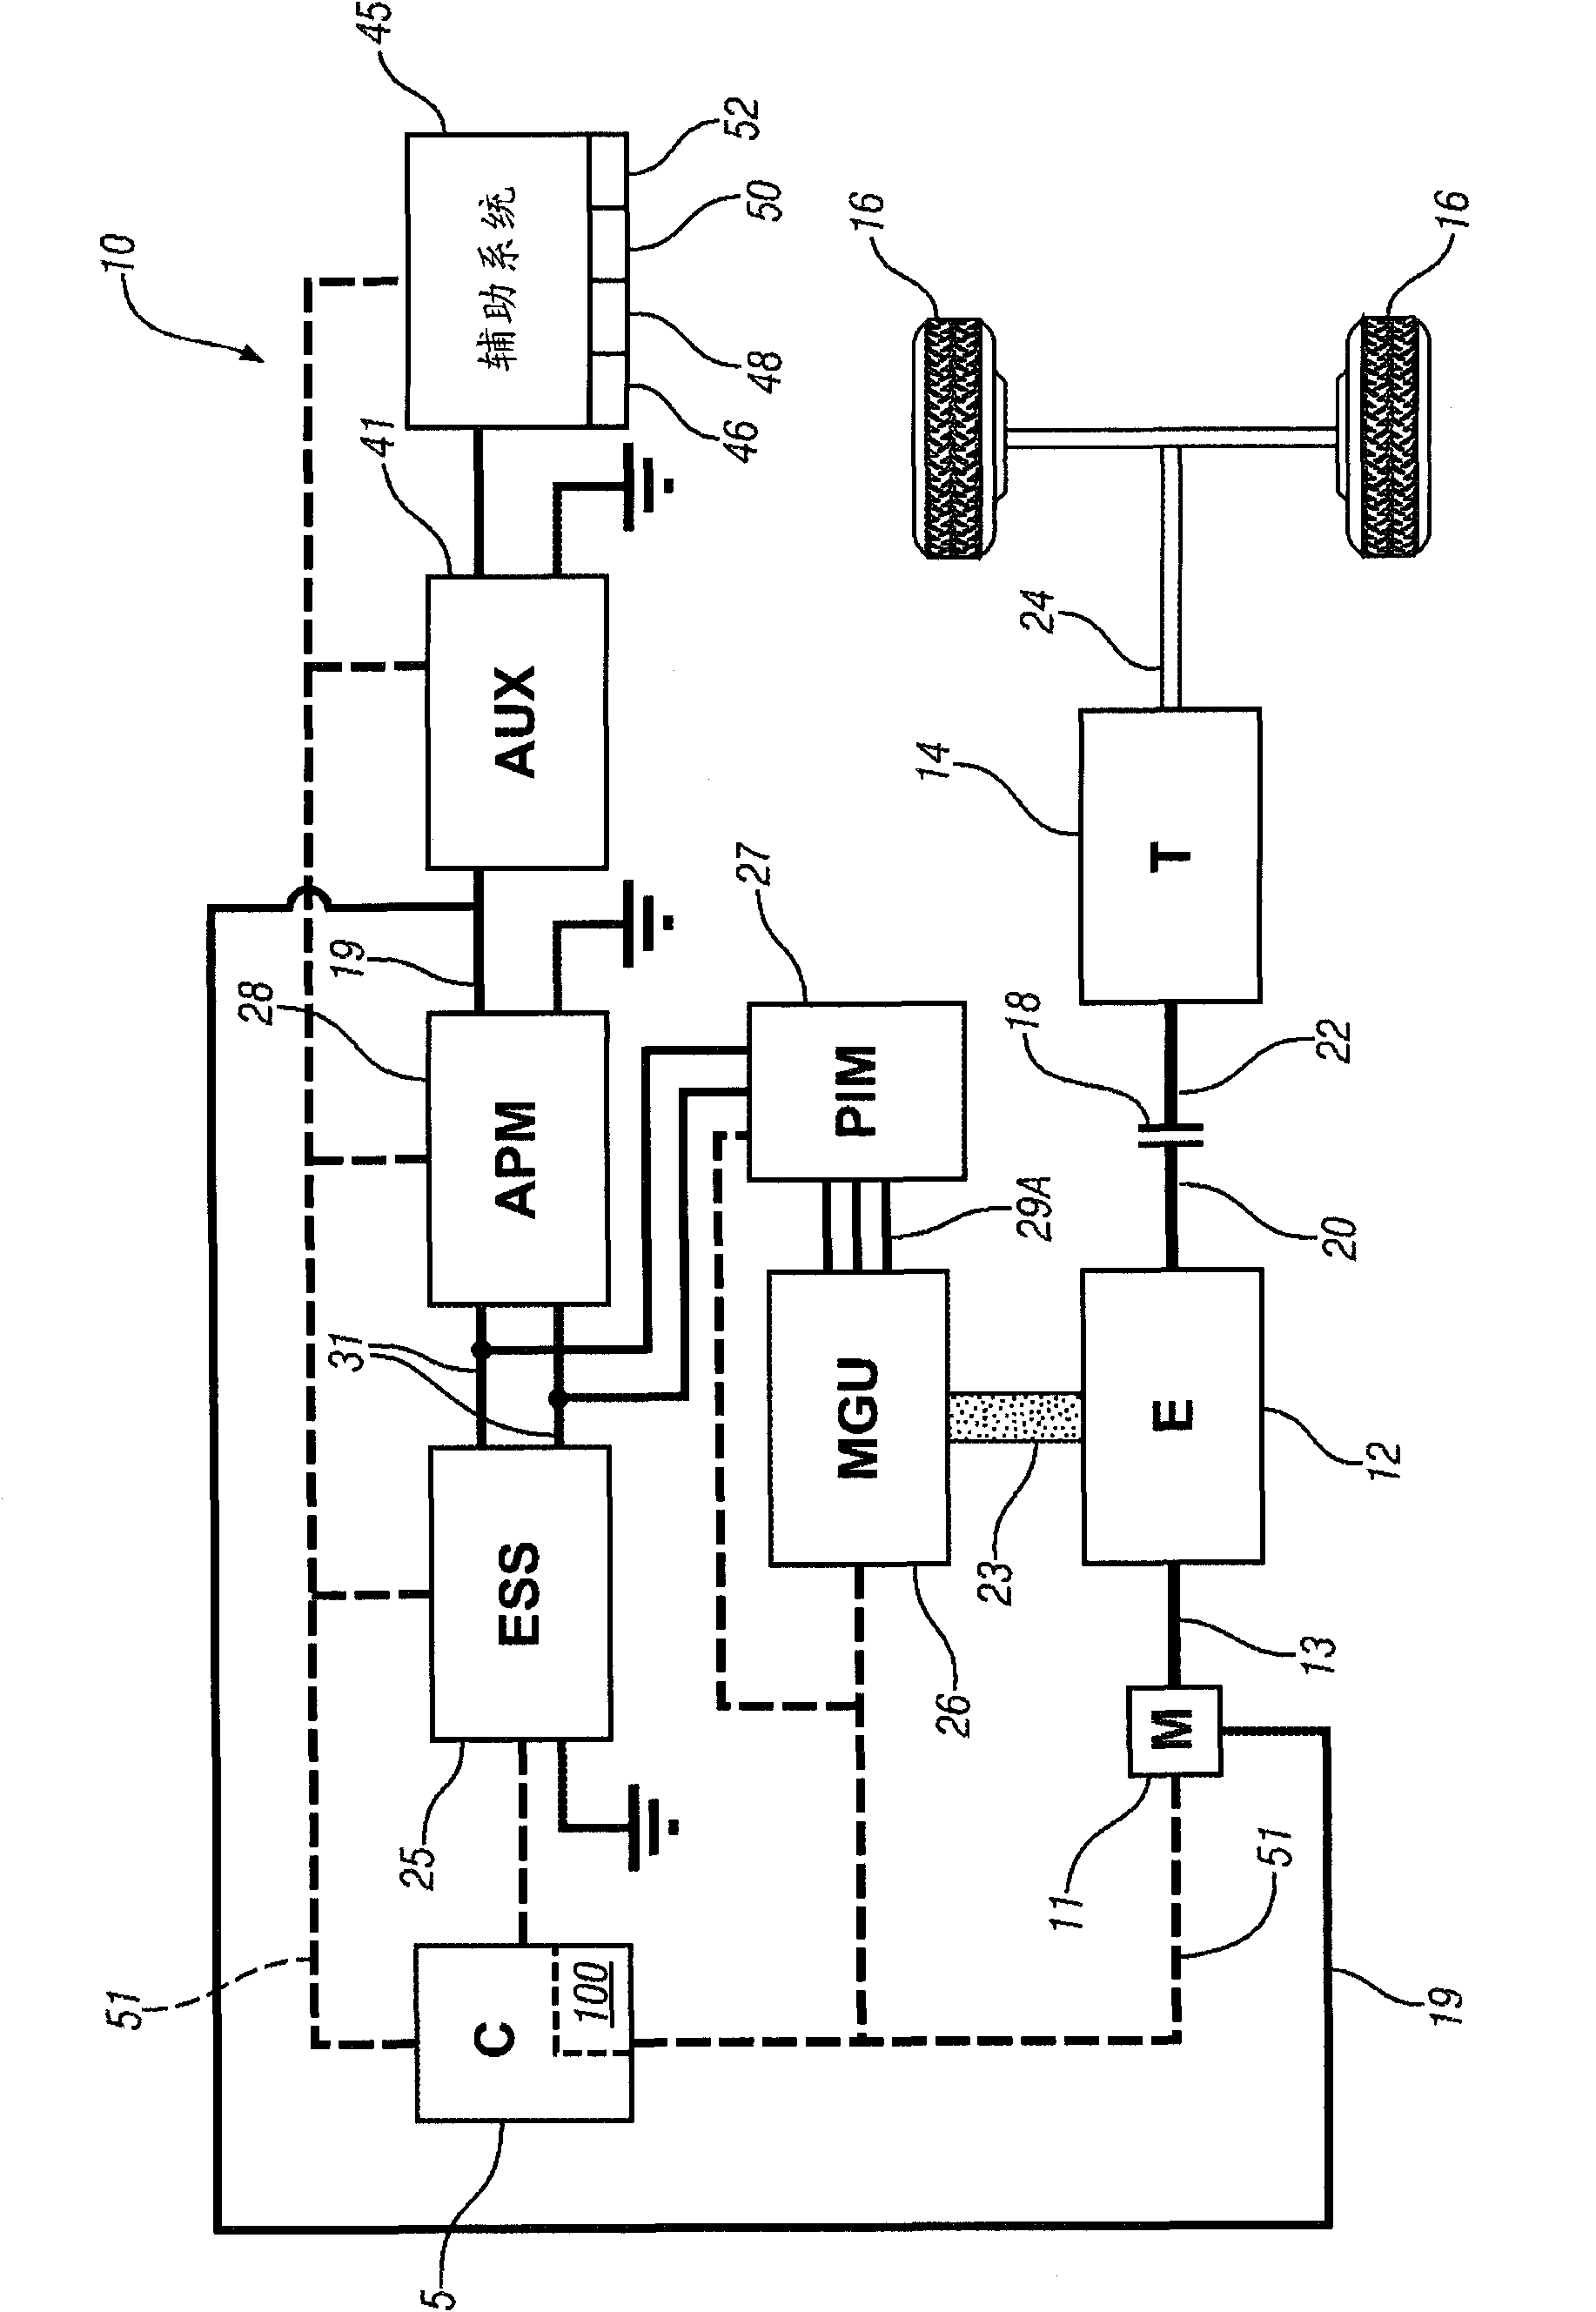 Control of an alternator-starter for a hybrid electric vehicle having a disconnected high-voltage battery